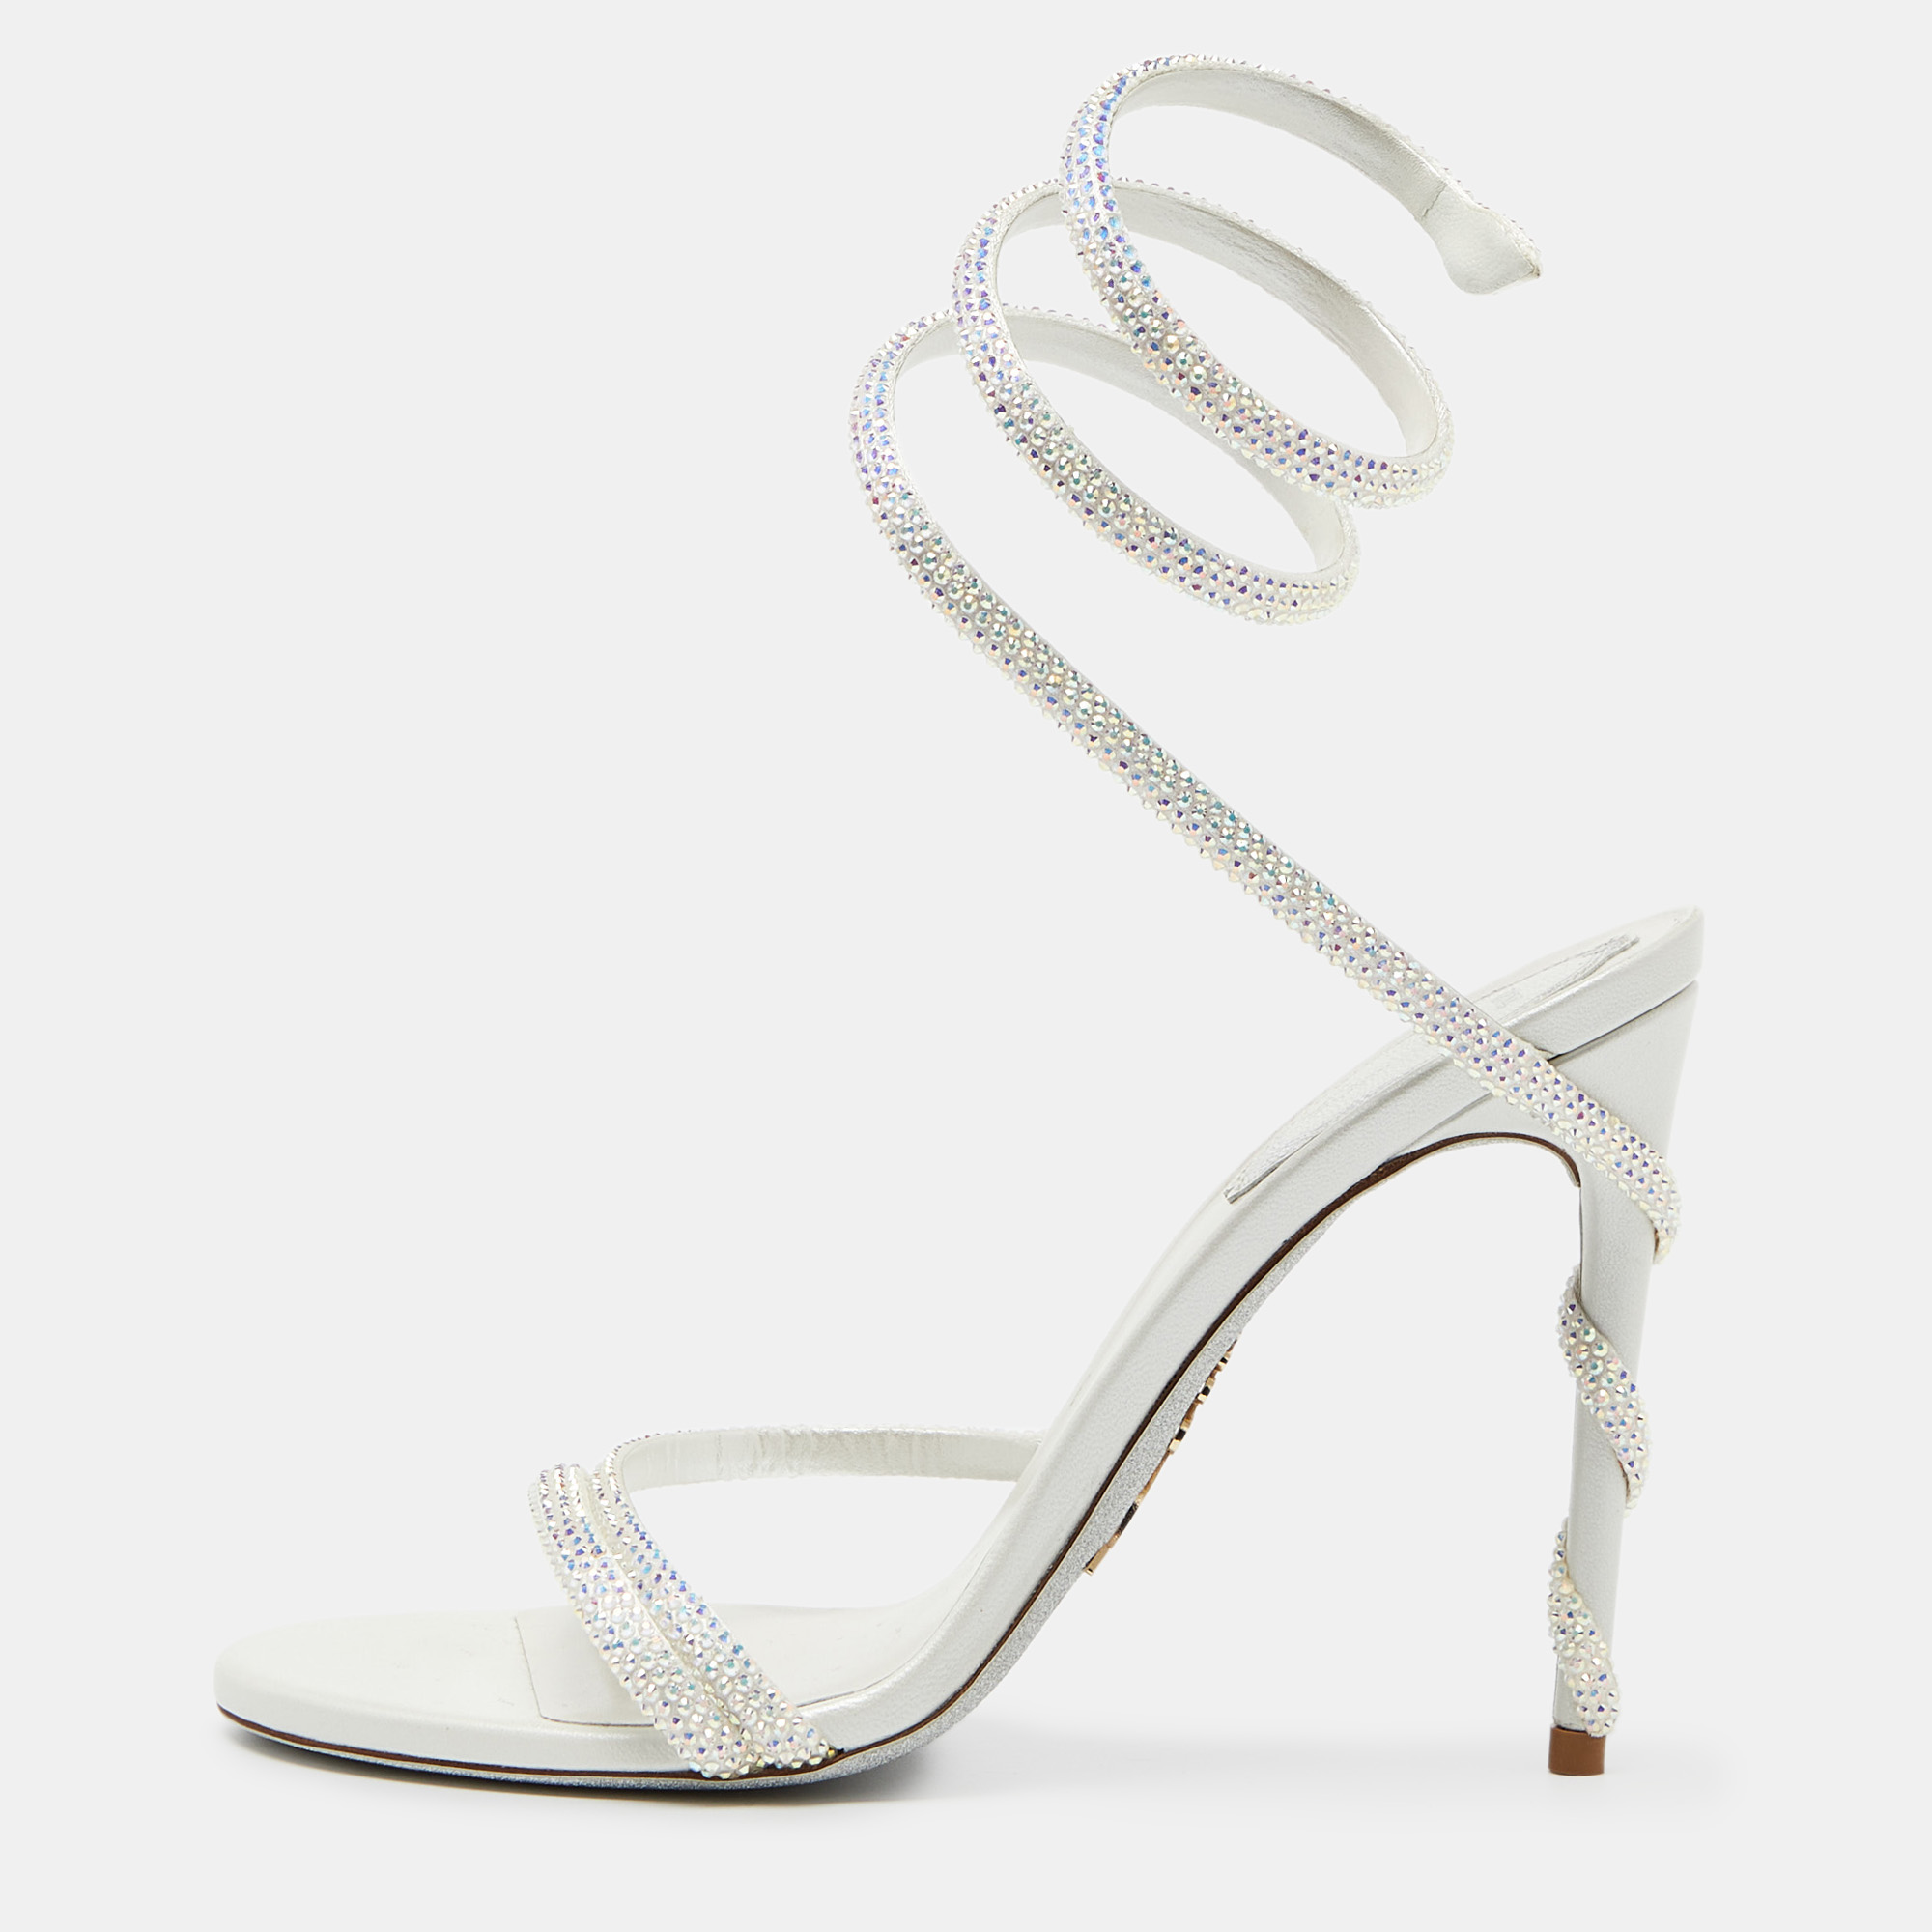 Rene caovilla pearl white crystal embellished leather cleo sandals size 37